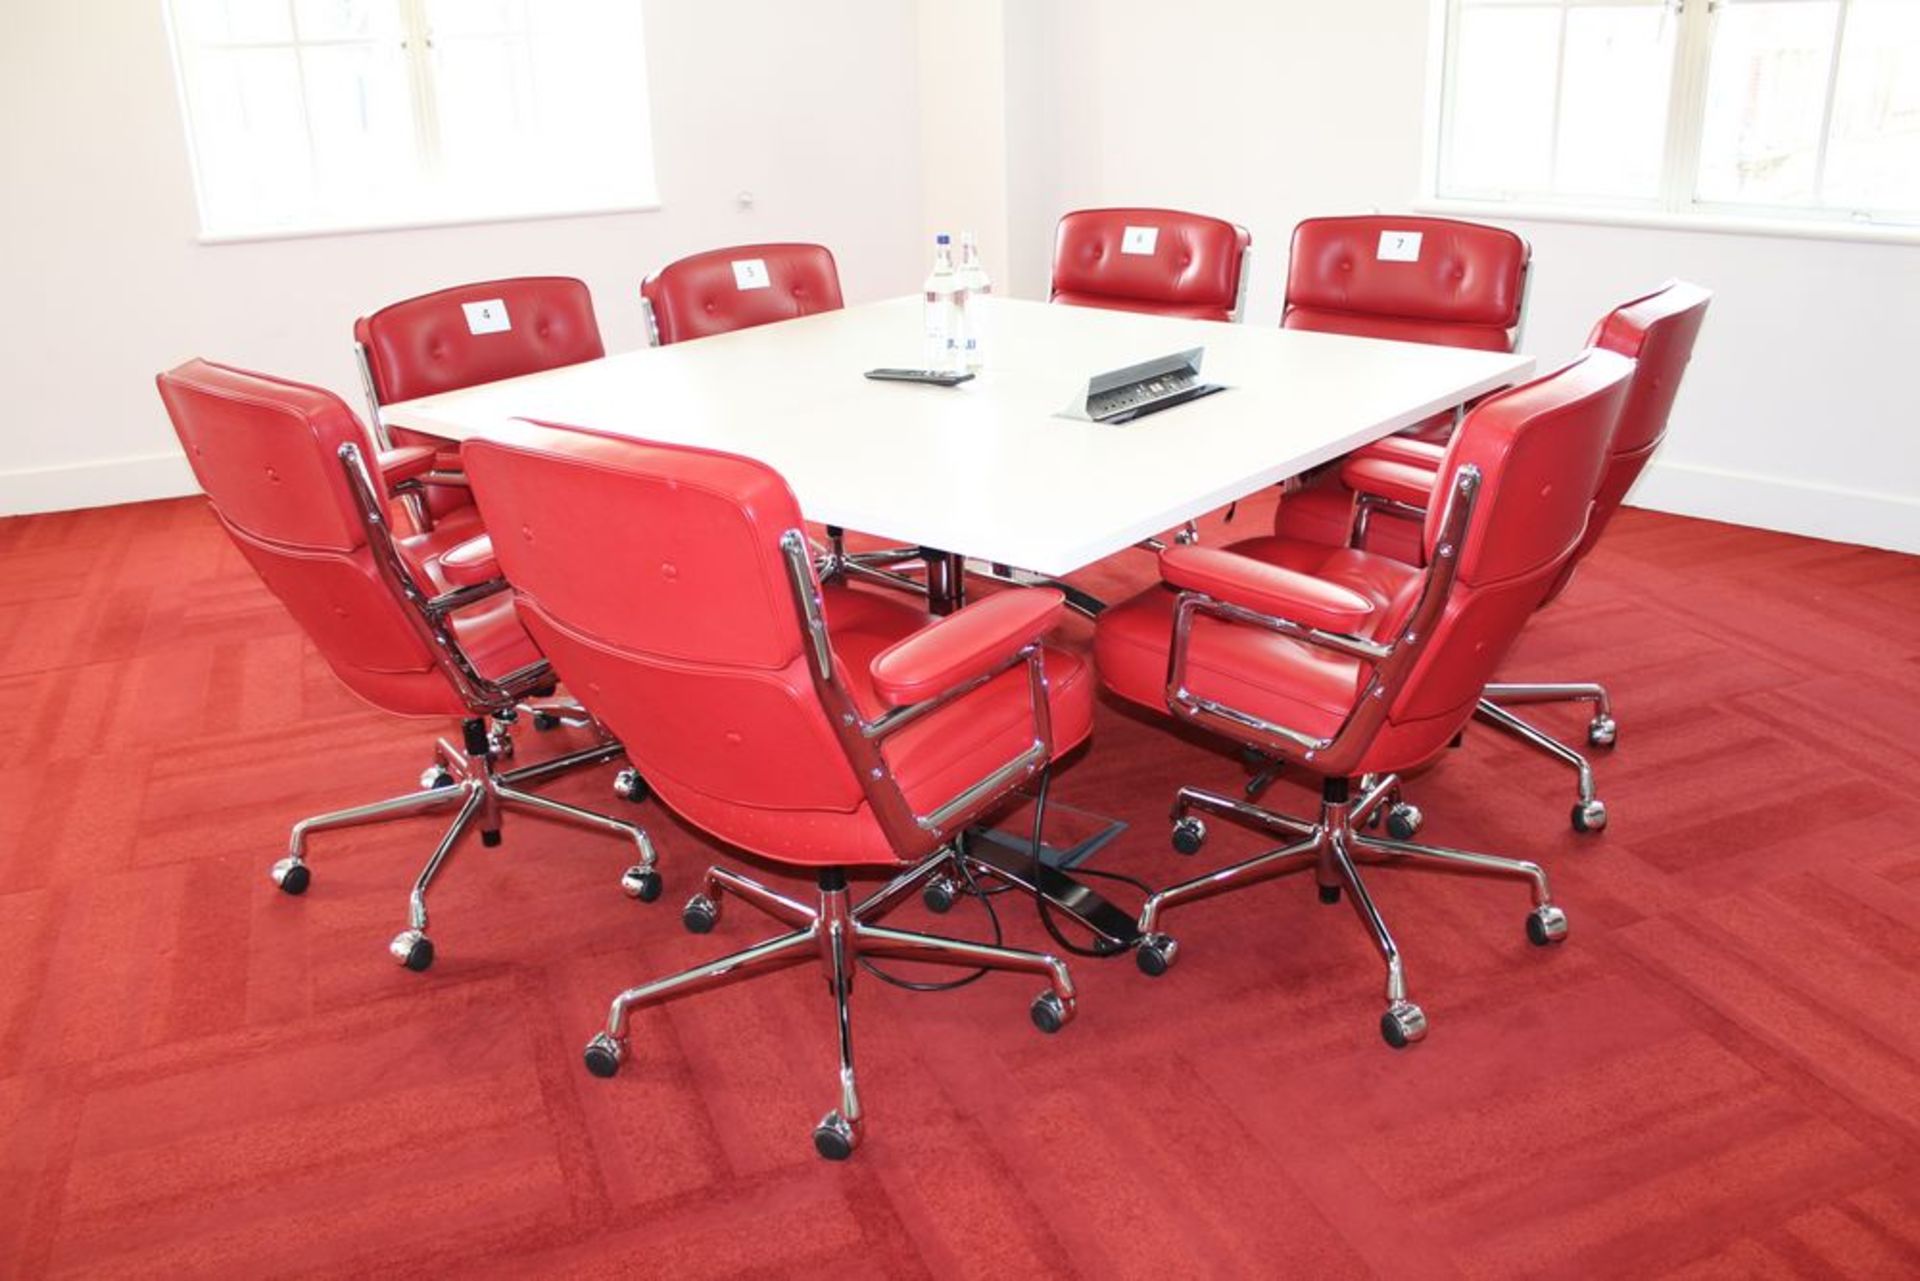 Combination Lot Comprising Lots 4 - 18, being 18:Vitra Eames Red Leather Lobby Chairs ** Please Not